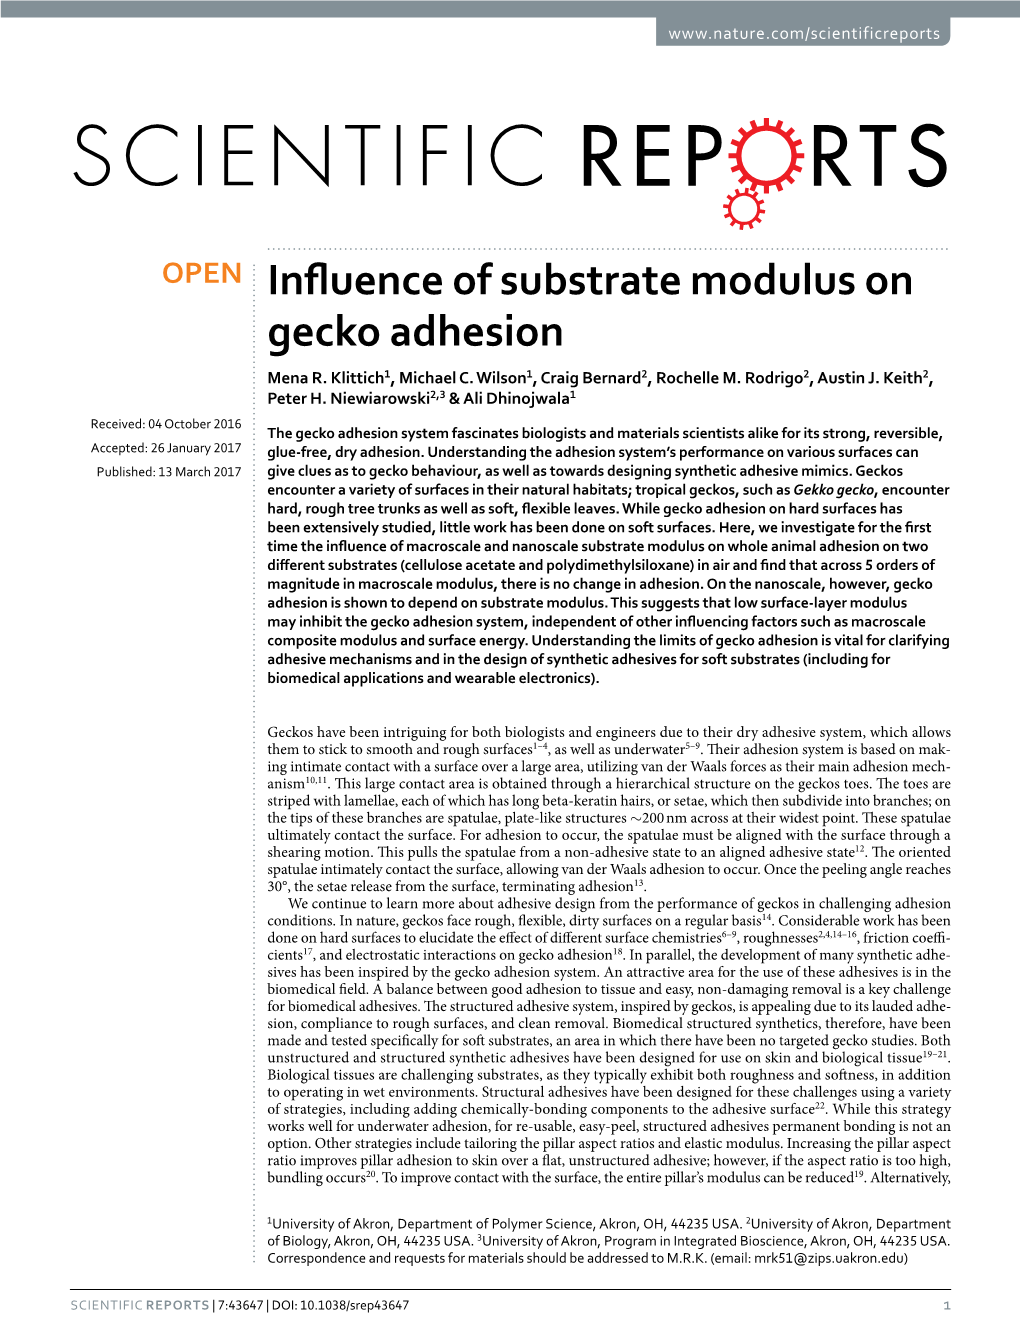 Influence of Substrate Modulus on Gecko Adhesion Mena R